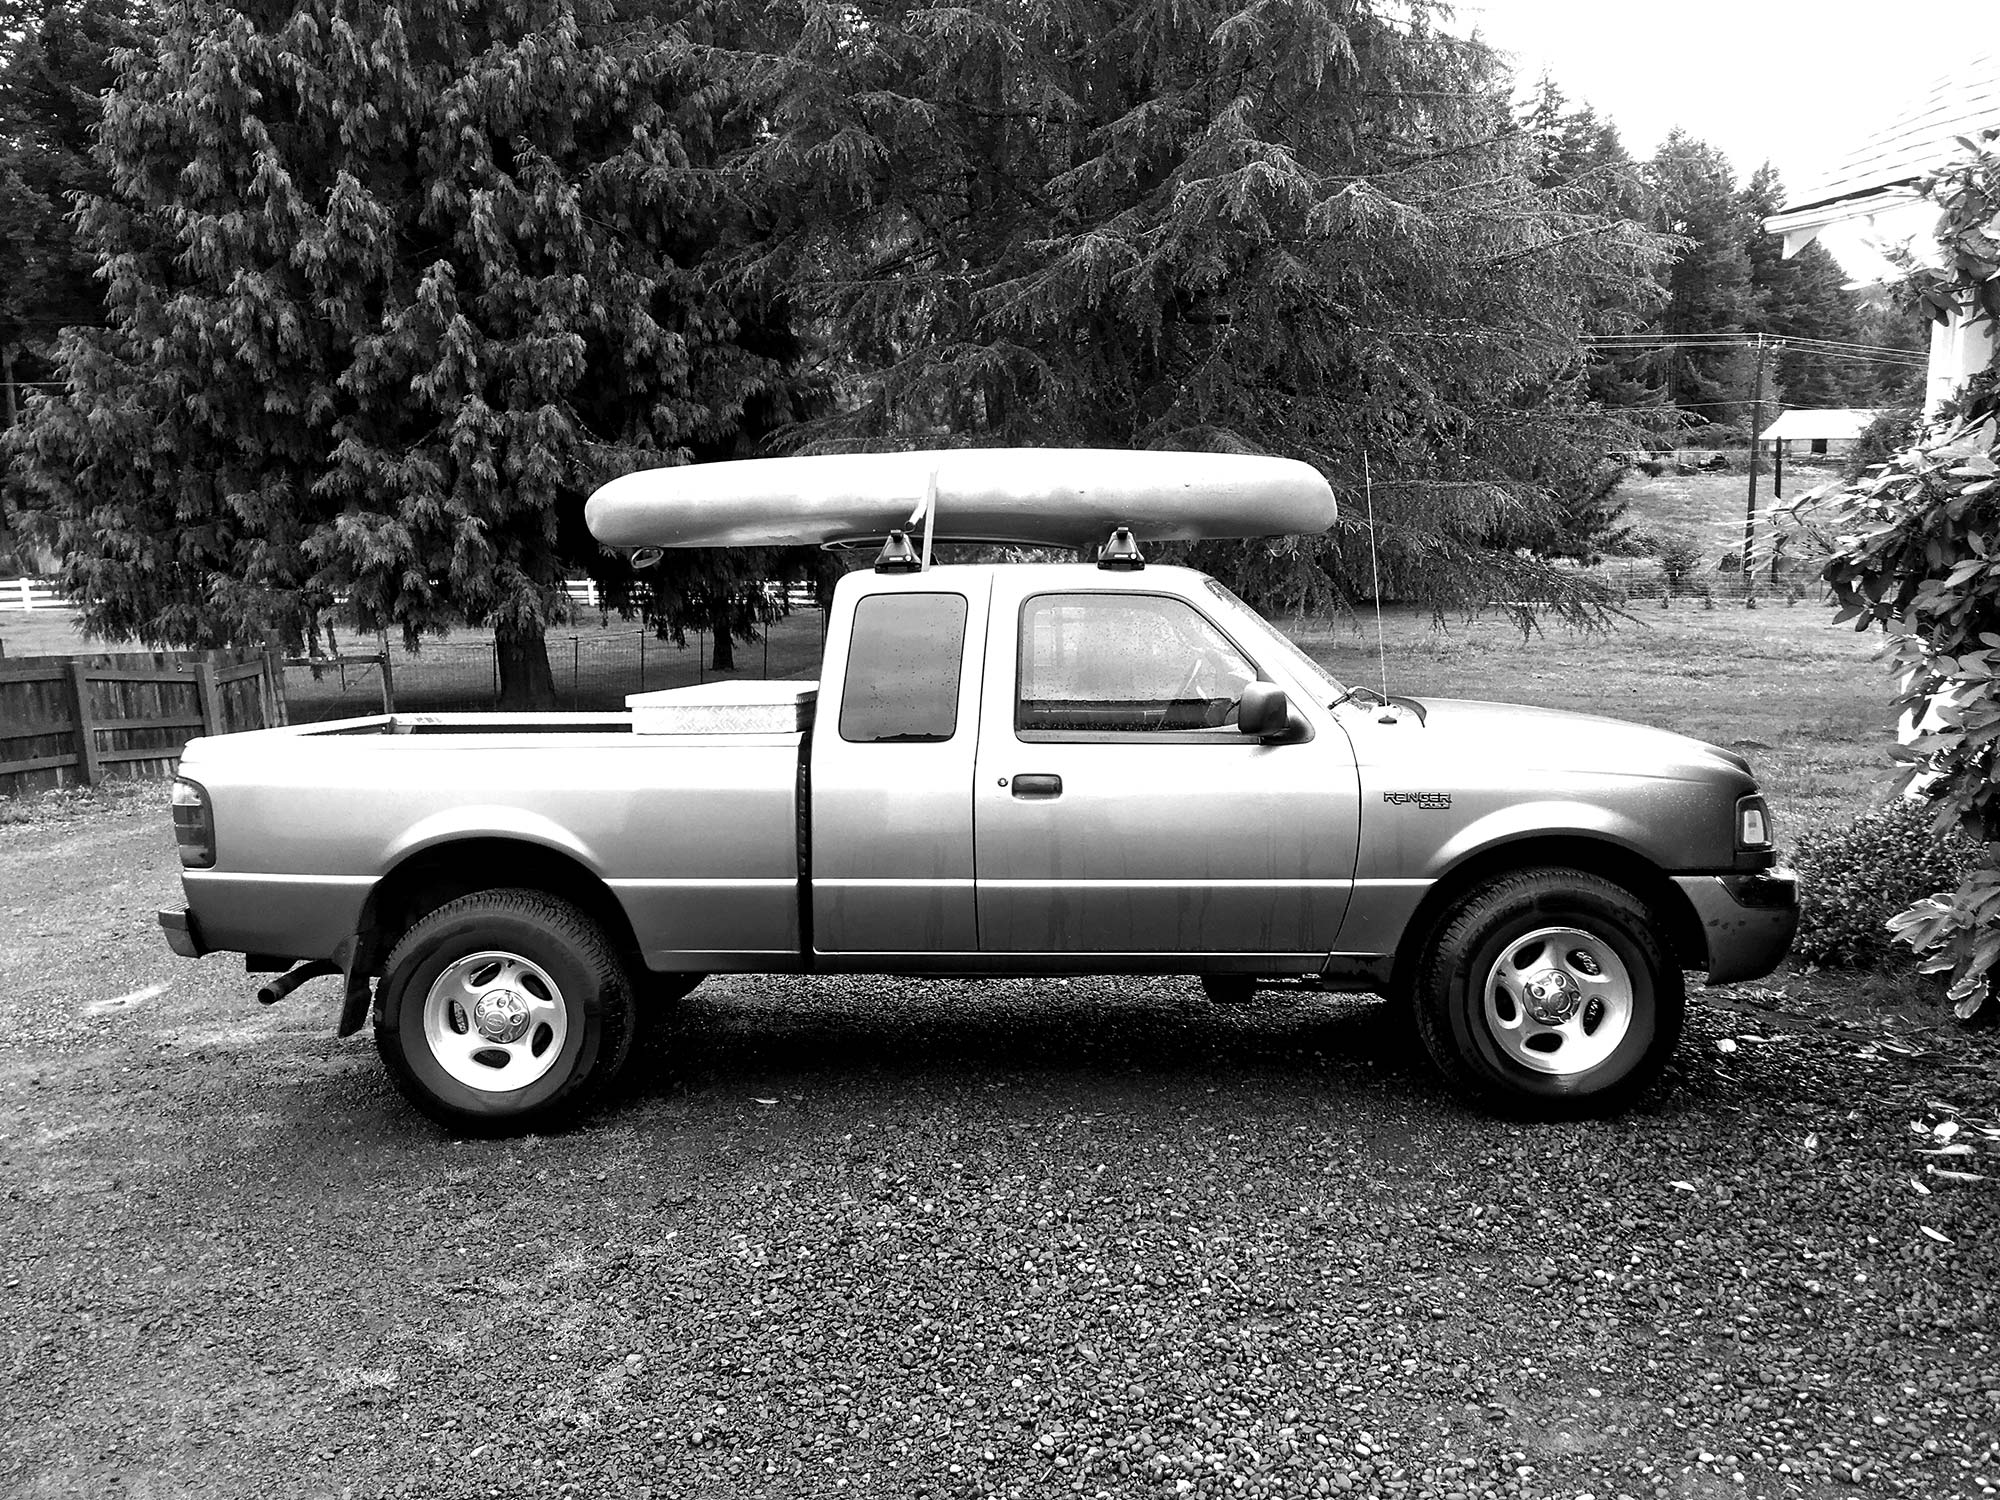 Black and white photo of the ford ranger with a kayak on top in a gravel driveway with a big tree in the background